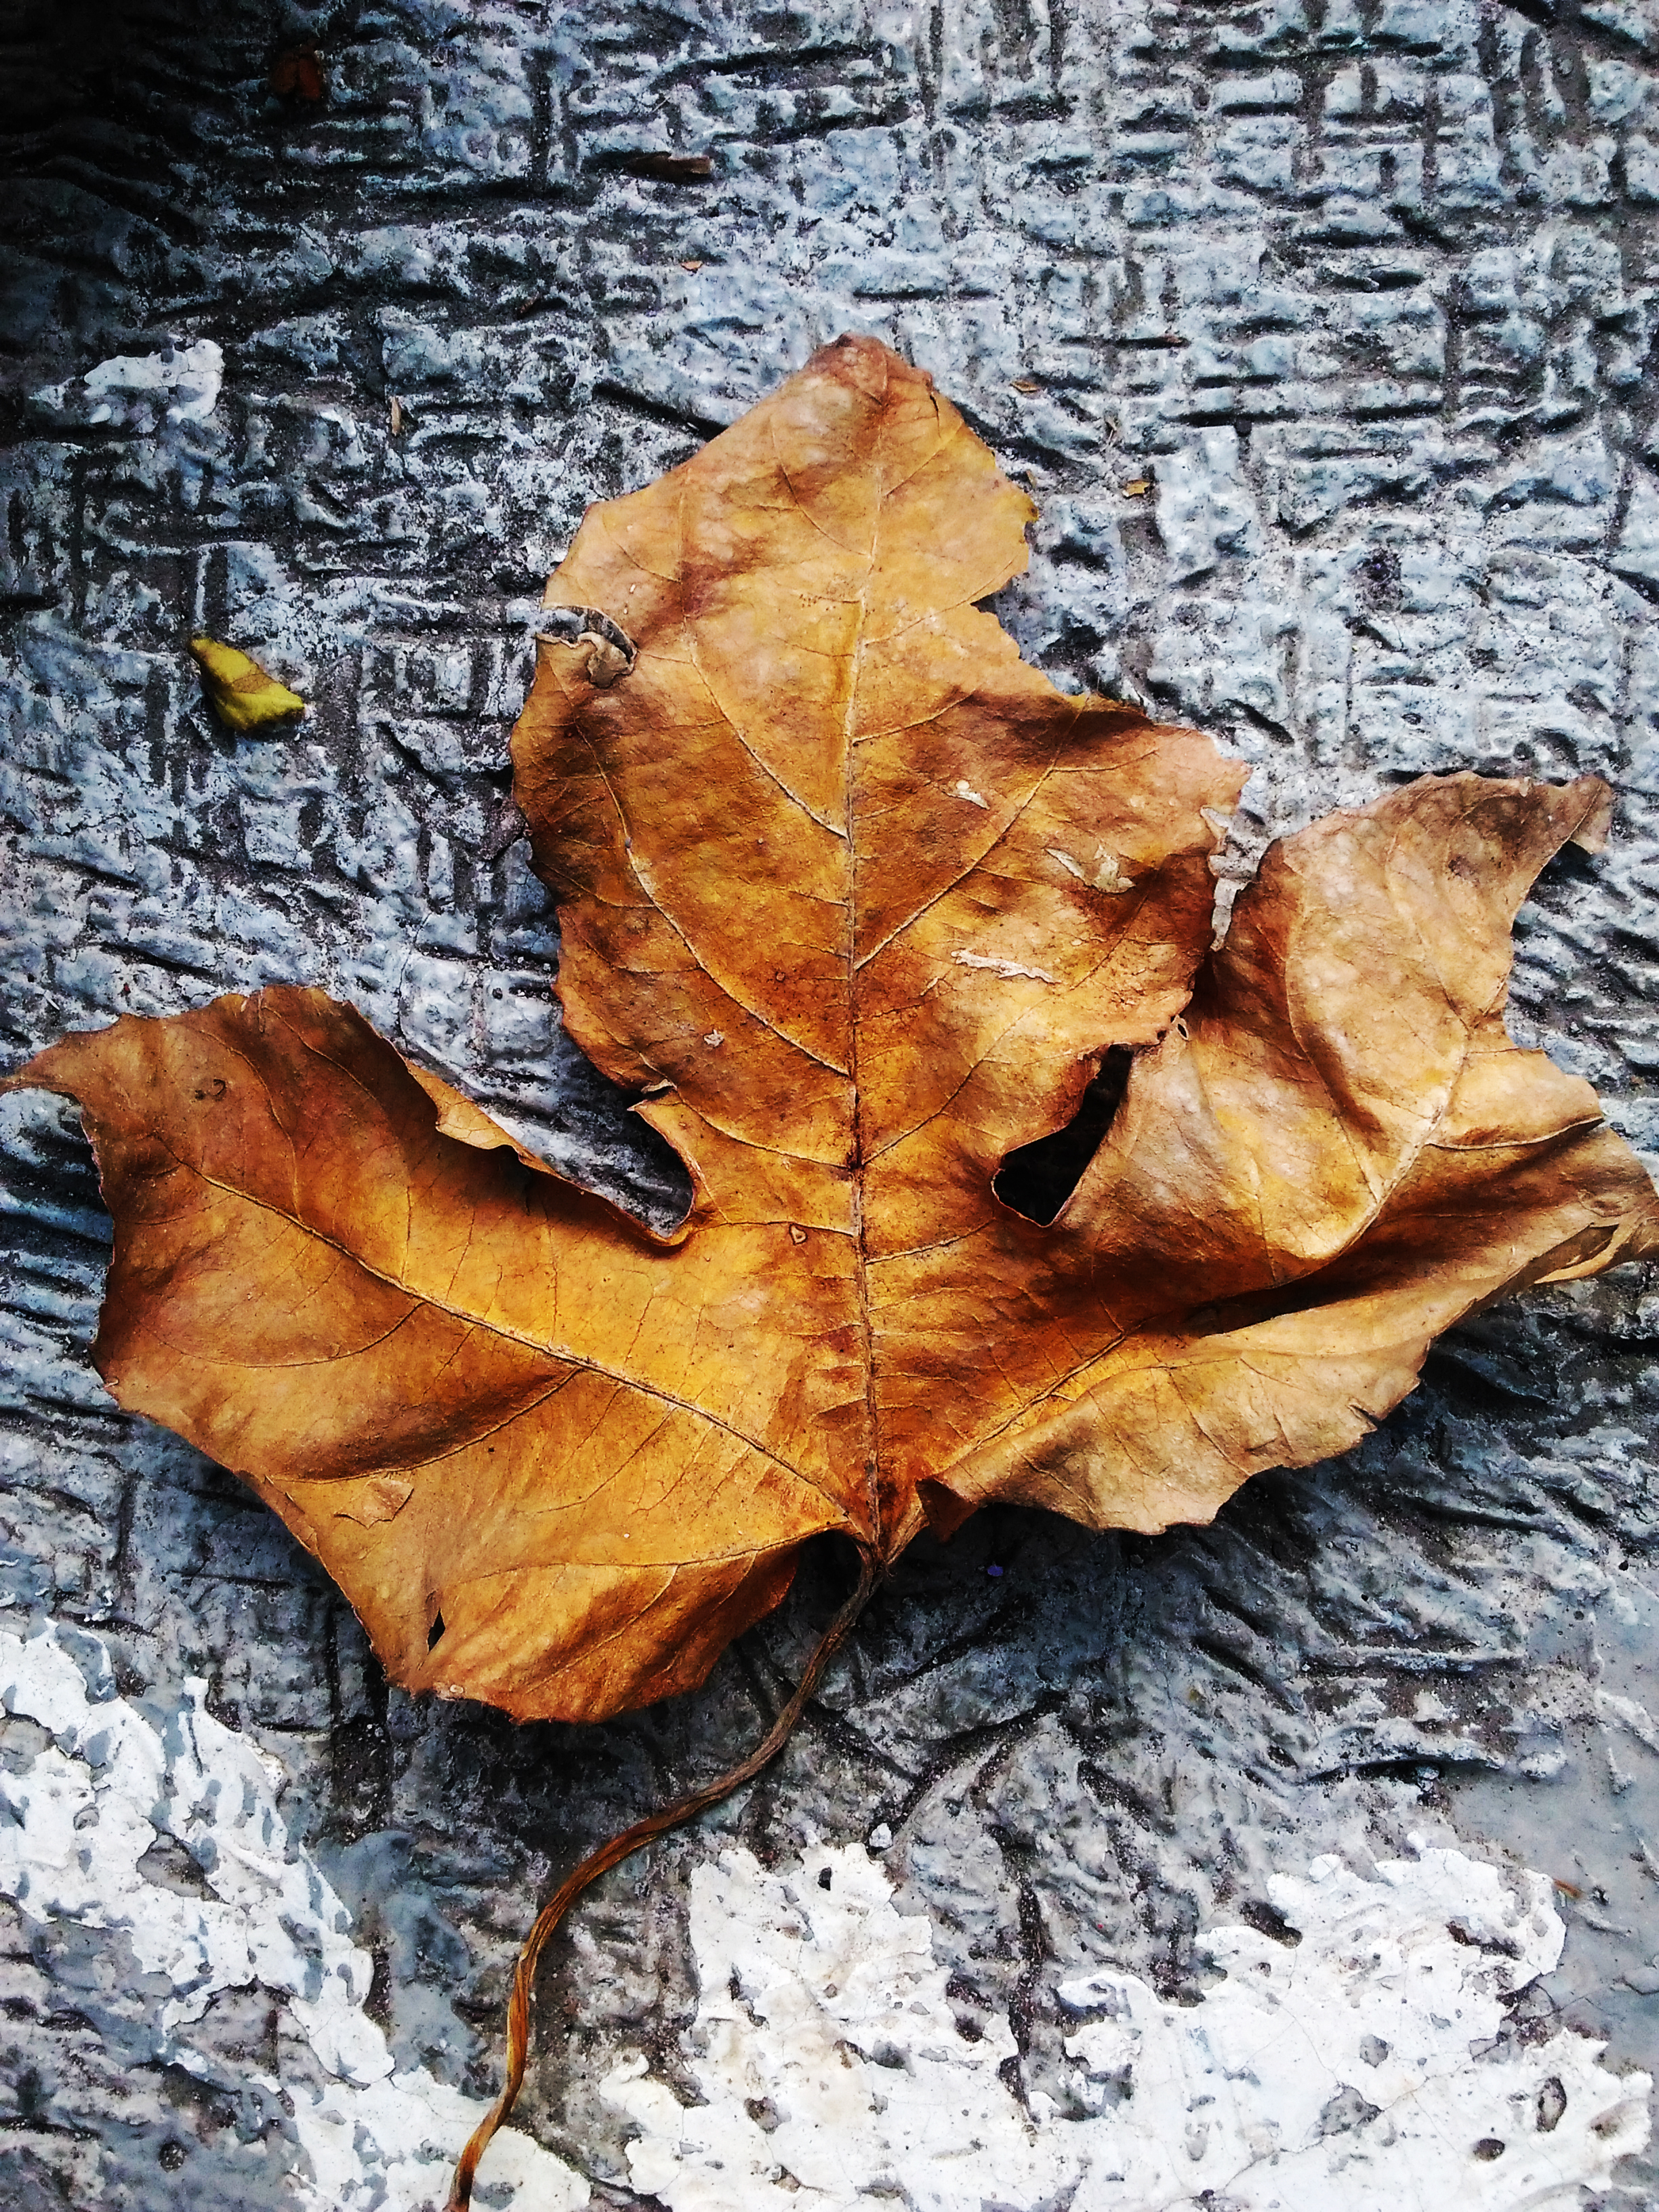 The dead leaf photo